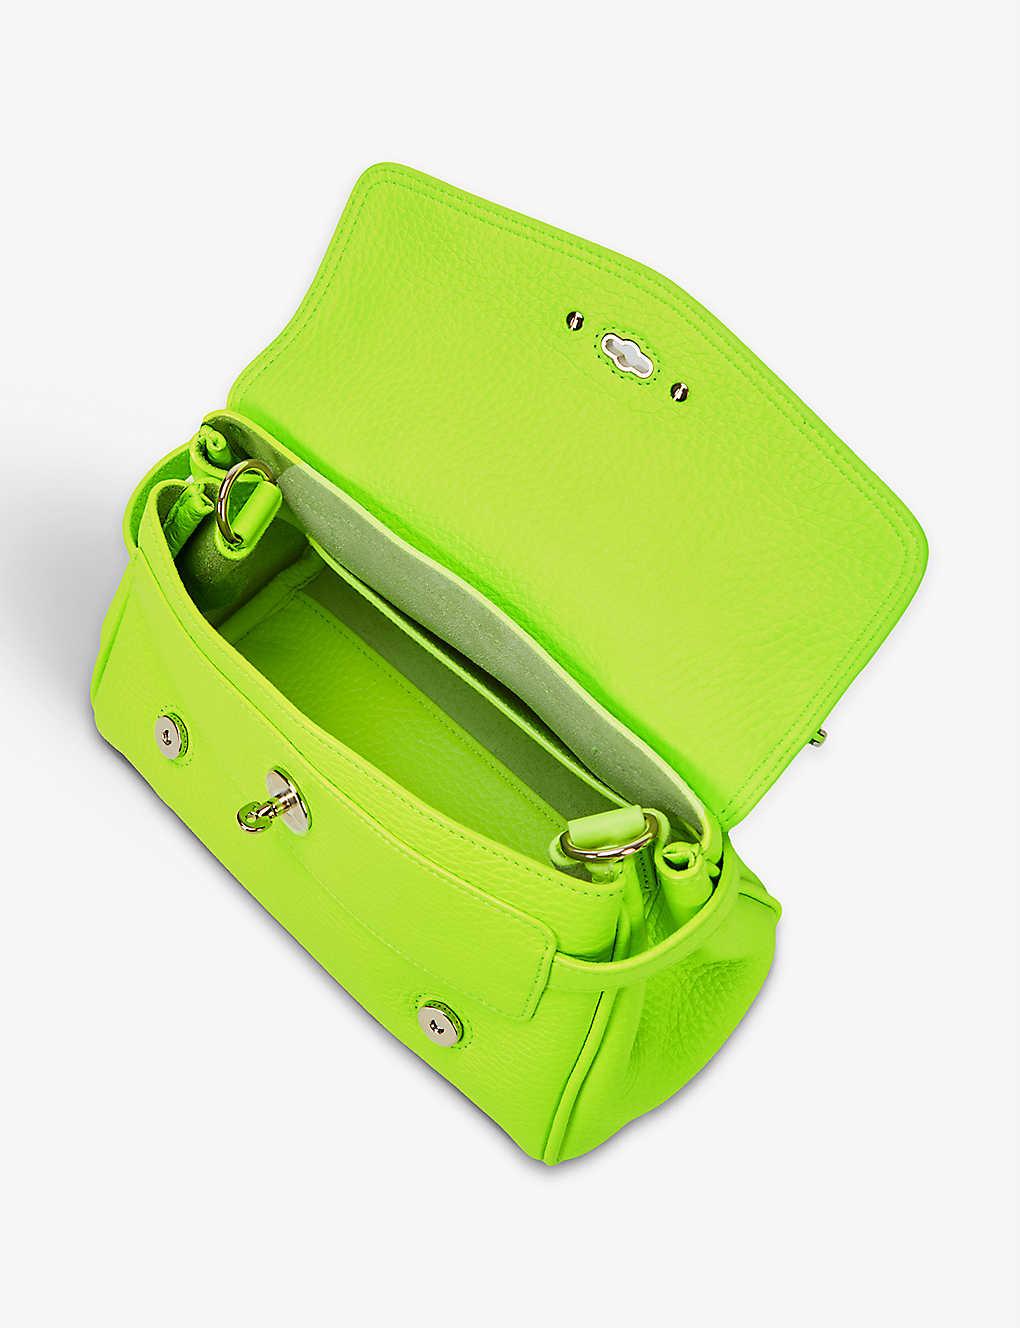 Mulberry Bayswater Heritage Leather Flip Lock Tote Handbag in Lime Green -  The Attic Place